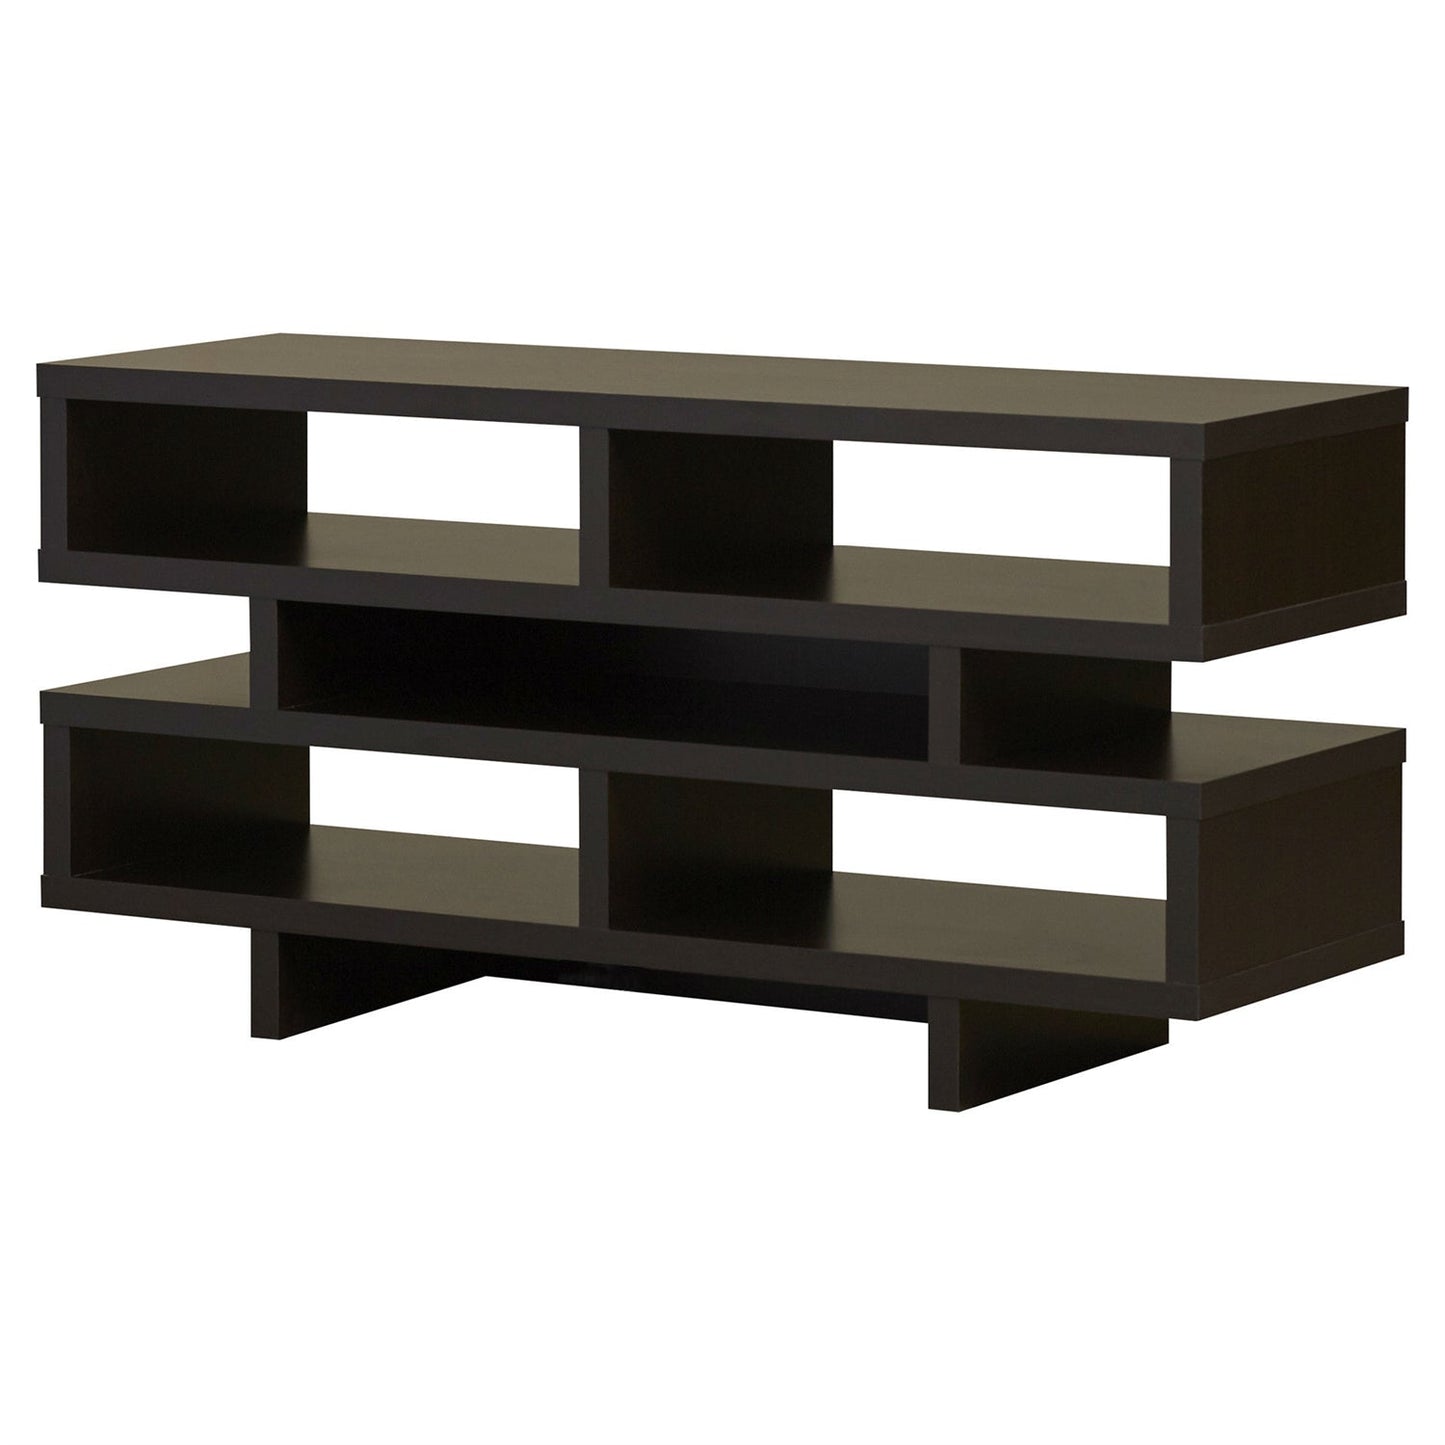 Living Room > TV Stands And Entertainment Centers - Modern TV Stand Entertainment Center In Dark Brown Cappuccino Wood Finish